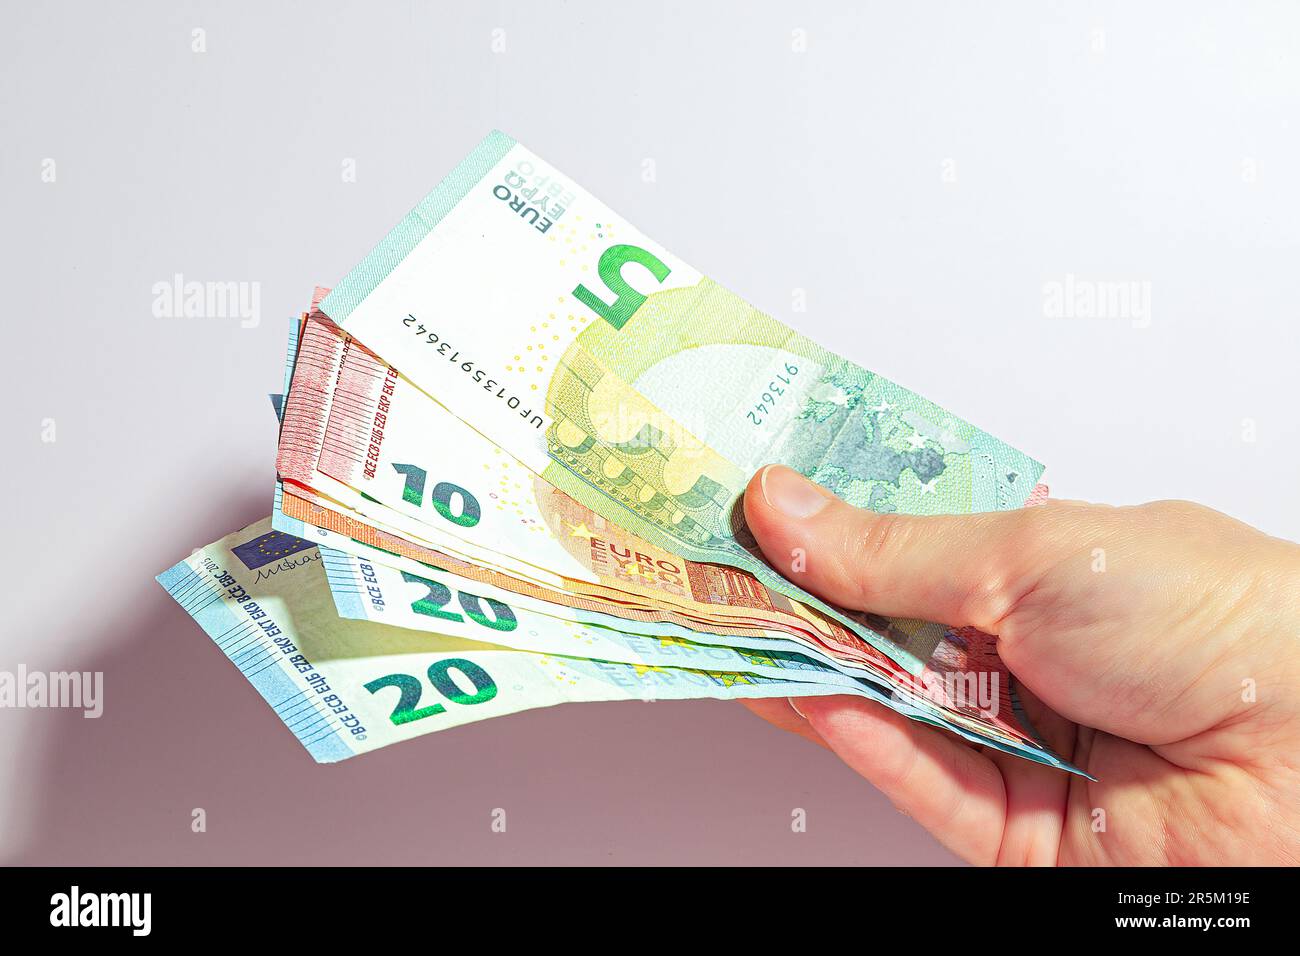 euro banknotes in hand Stock Photo